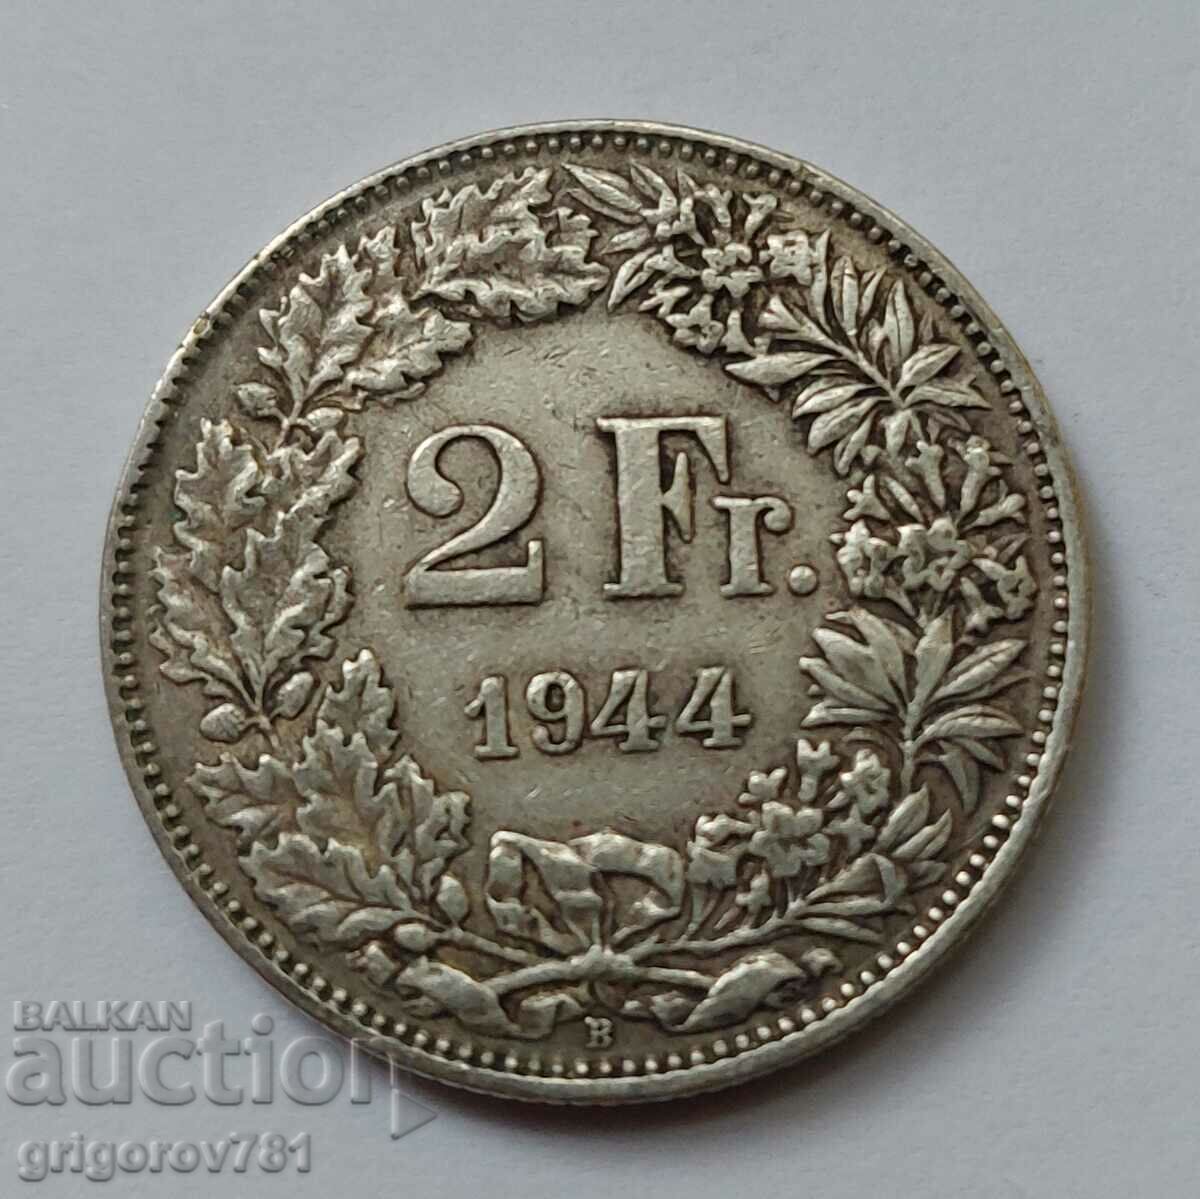 2 Francs Silver Switzerland 1944 B - Silver Coin #1